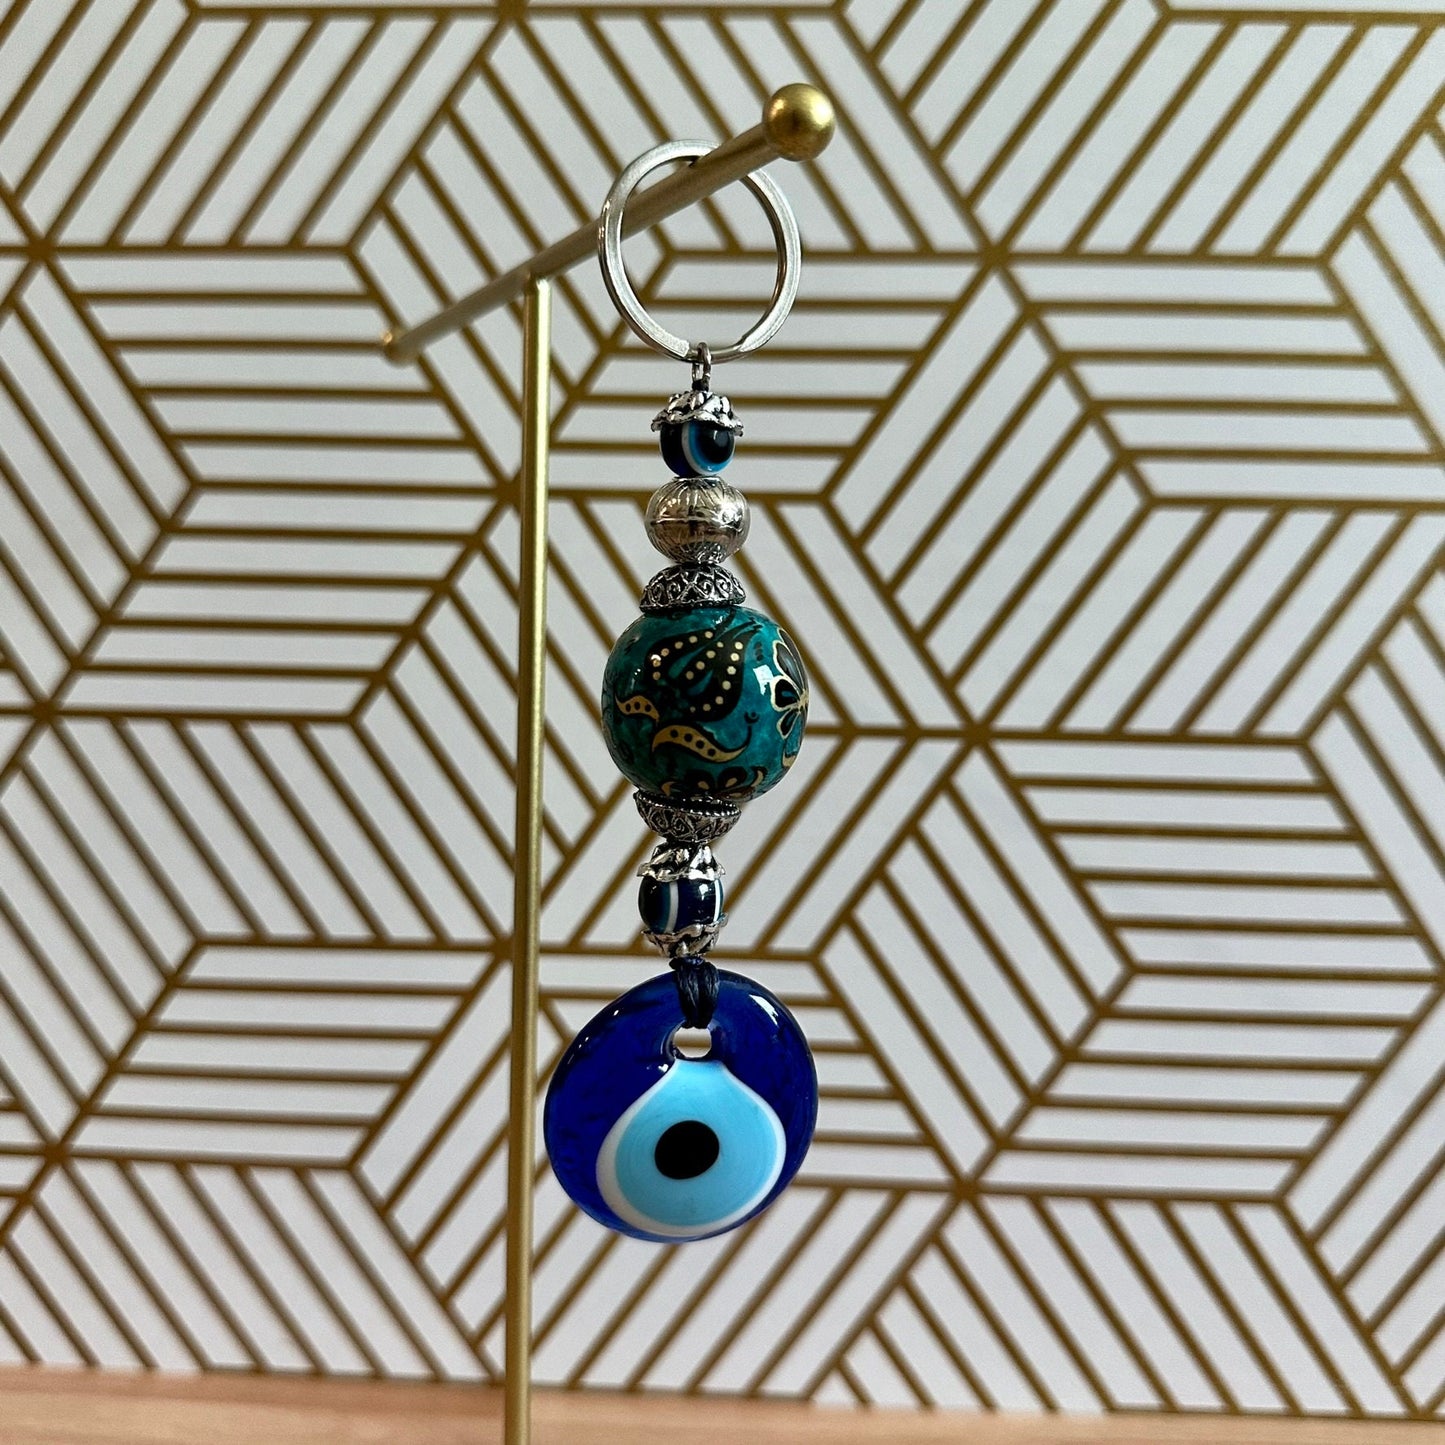 Evil Eye Nazar Boncuk Mal De Ojo Keychain with Hand Painted Ceramic Ball - Green and Gold Floral Tulip — Fast Shipping!